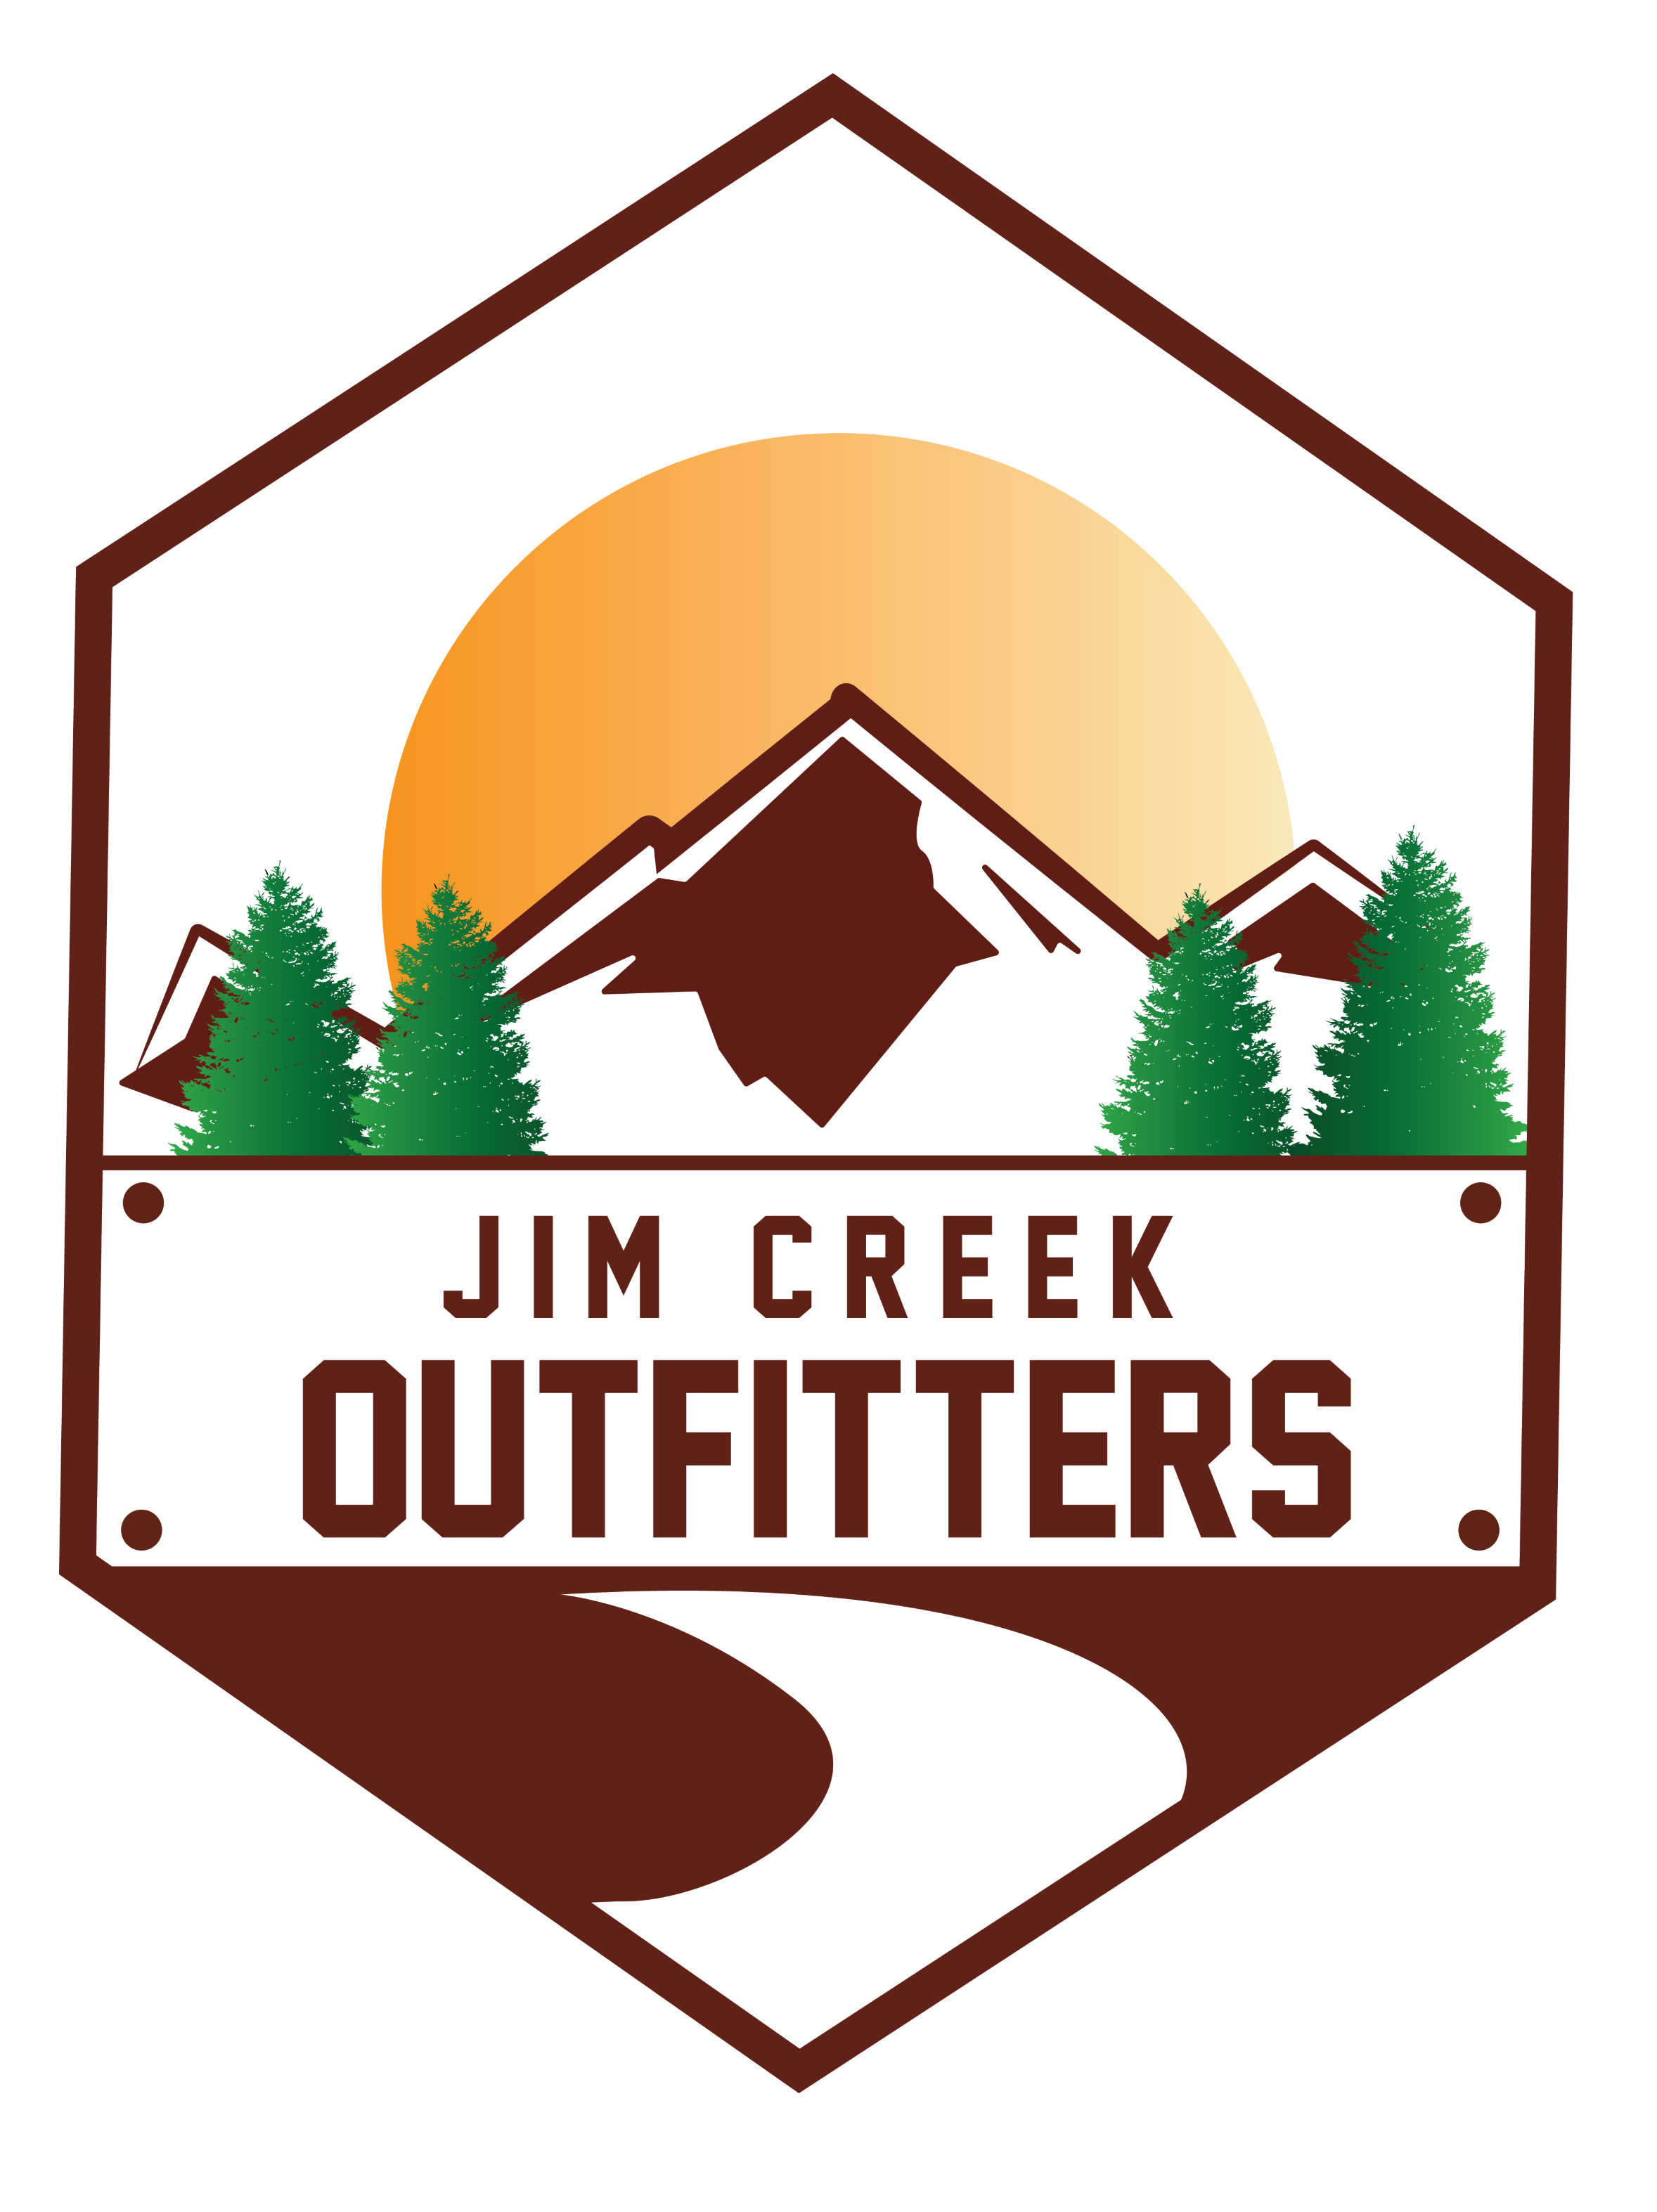 Jim Creek Outfitters